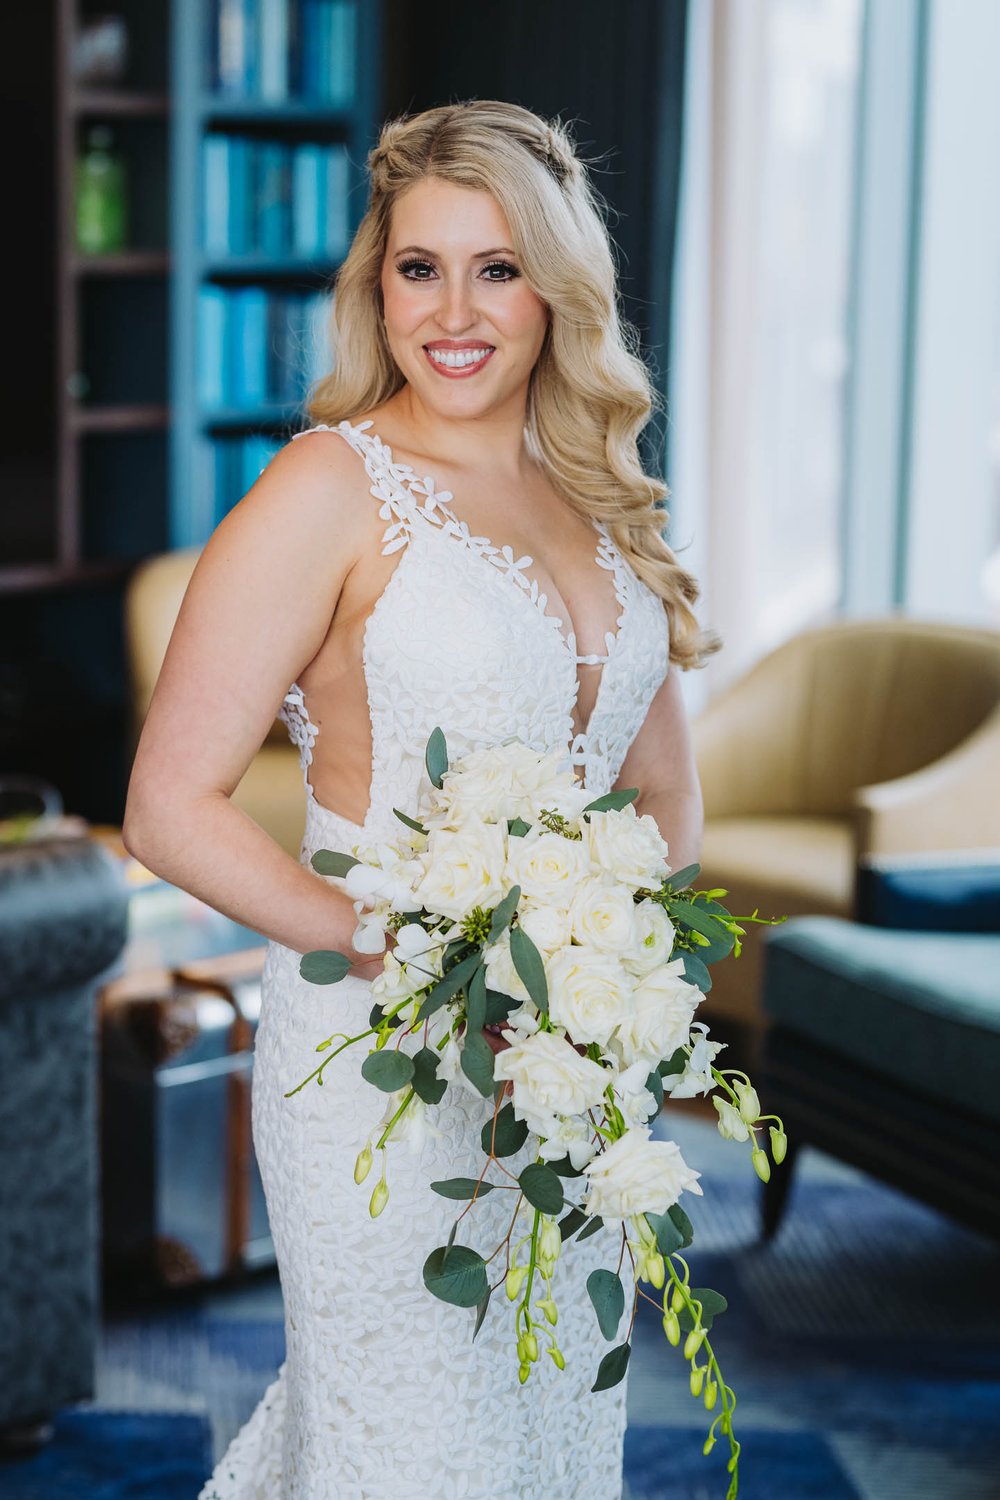 Wedding Day Photos | Ravenswood Event Center | J. Brown Photography | classic portrait of bride at hotel suite